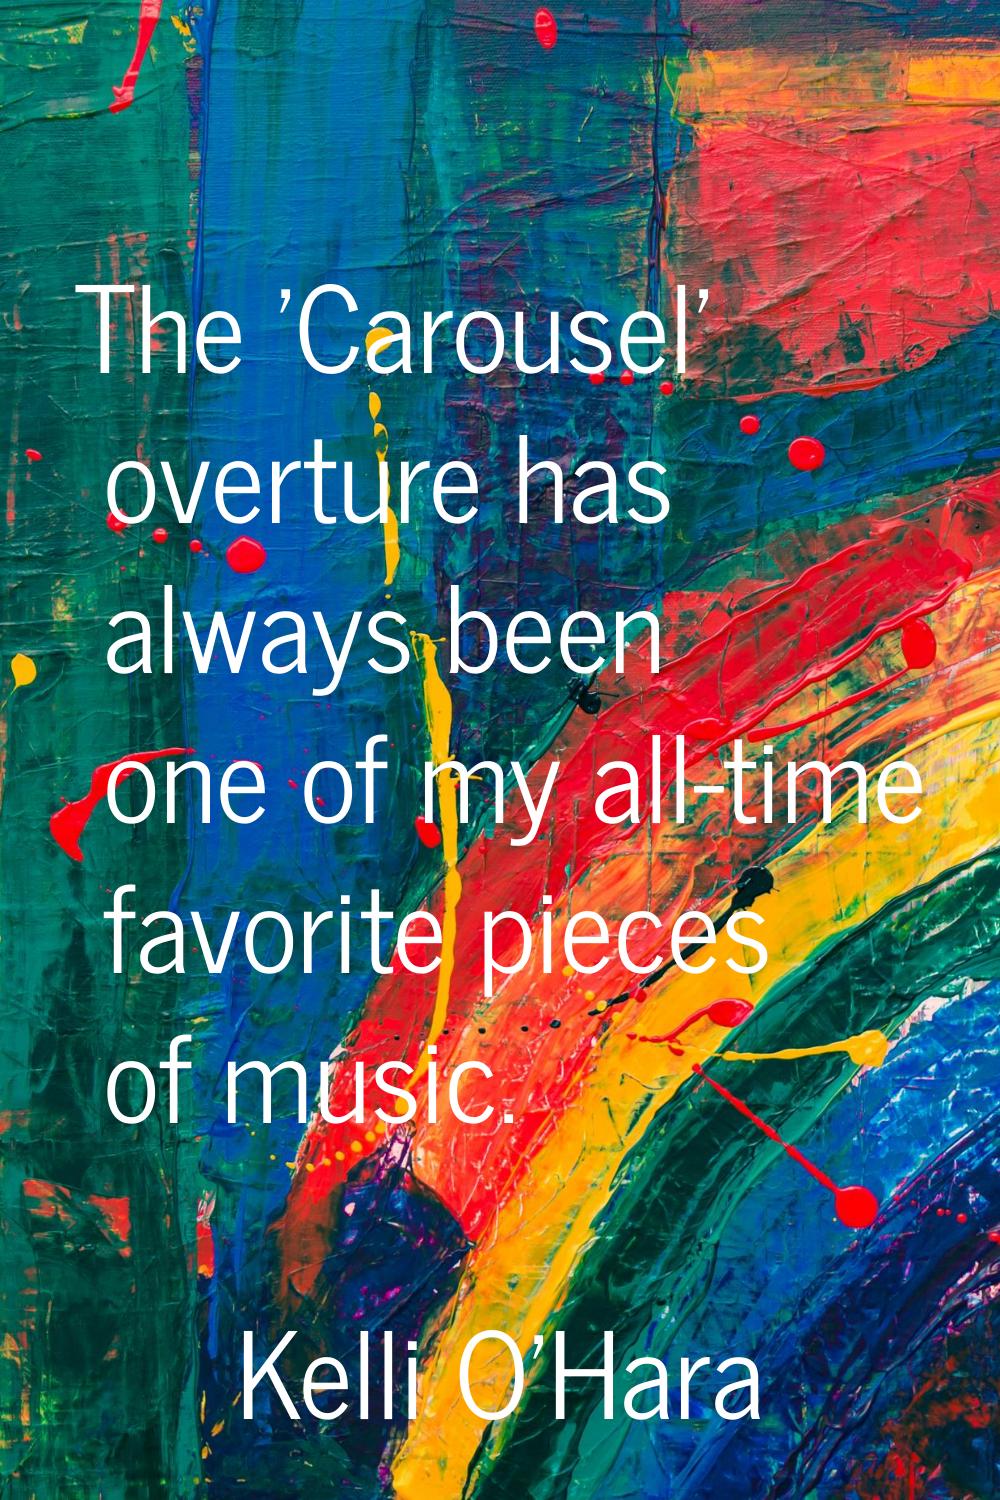 The 'Carousel' overture has always been one of my all-time favorite pieces of music.